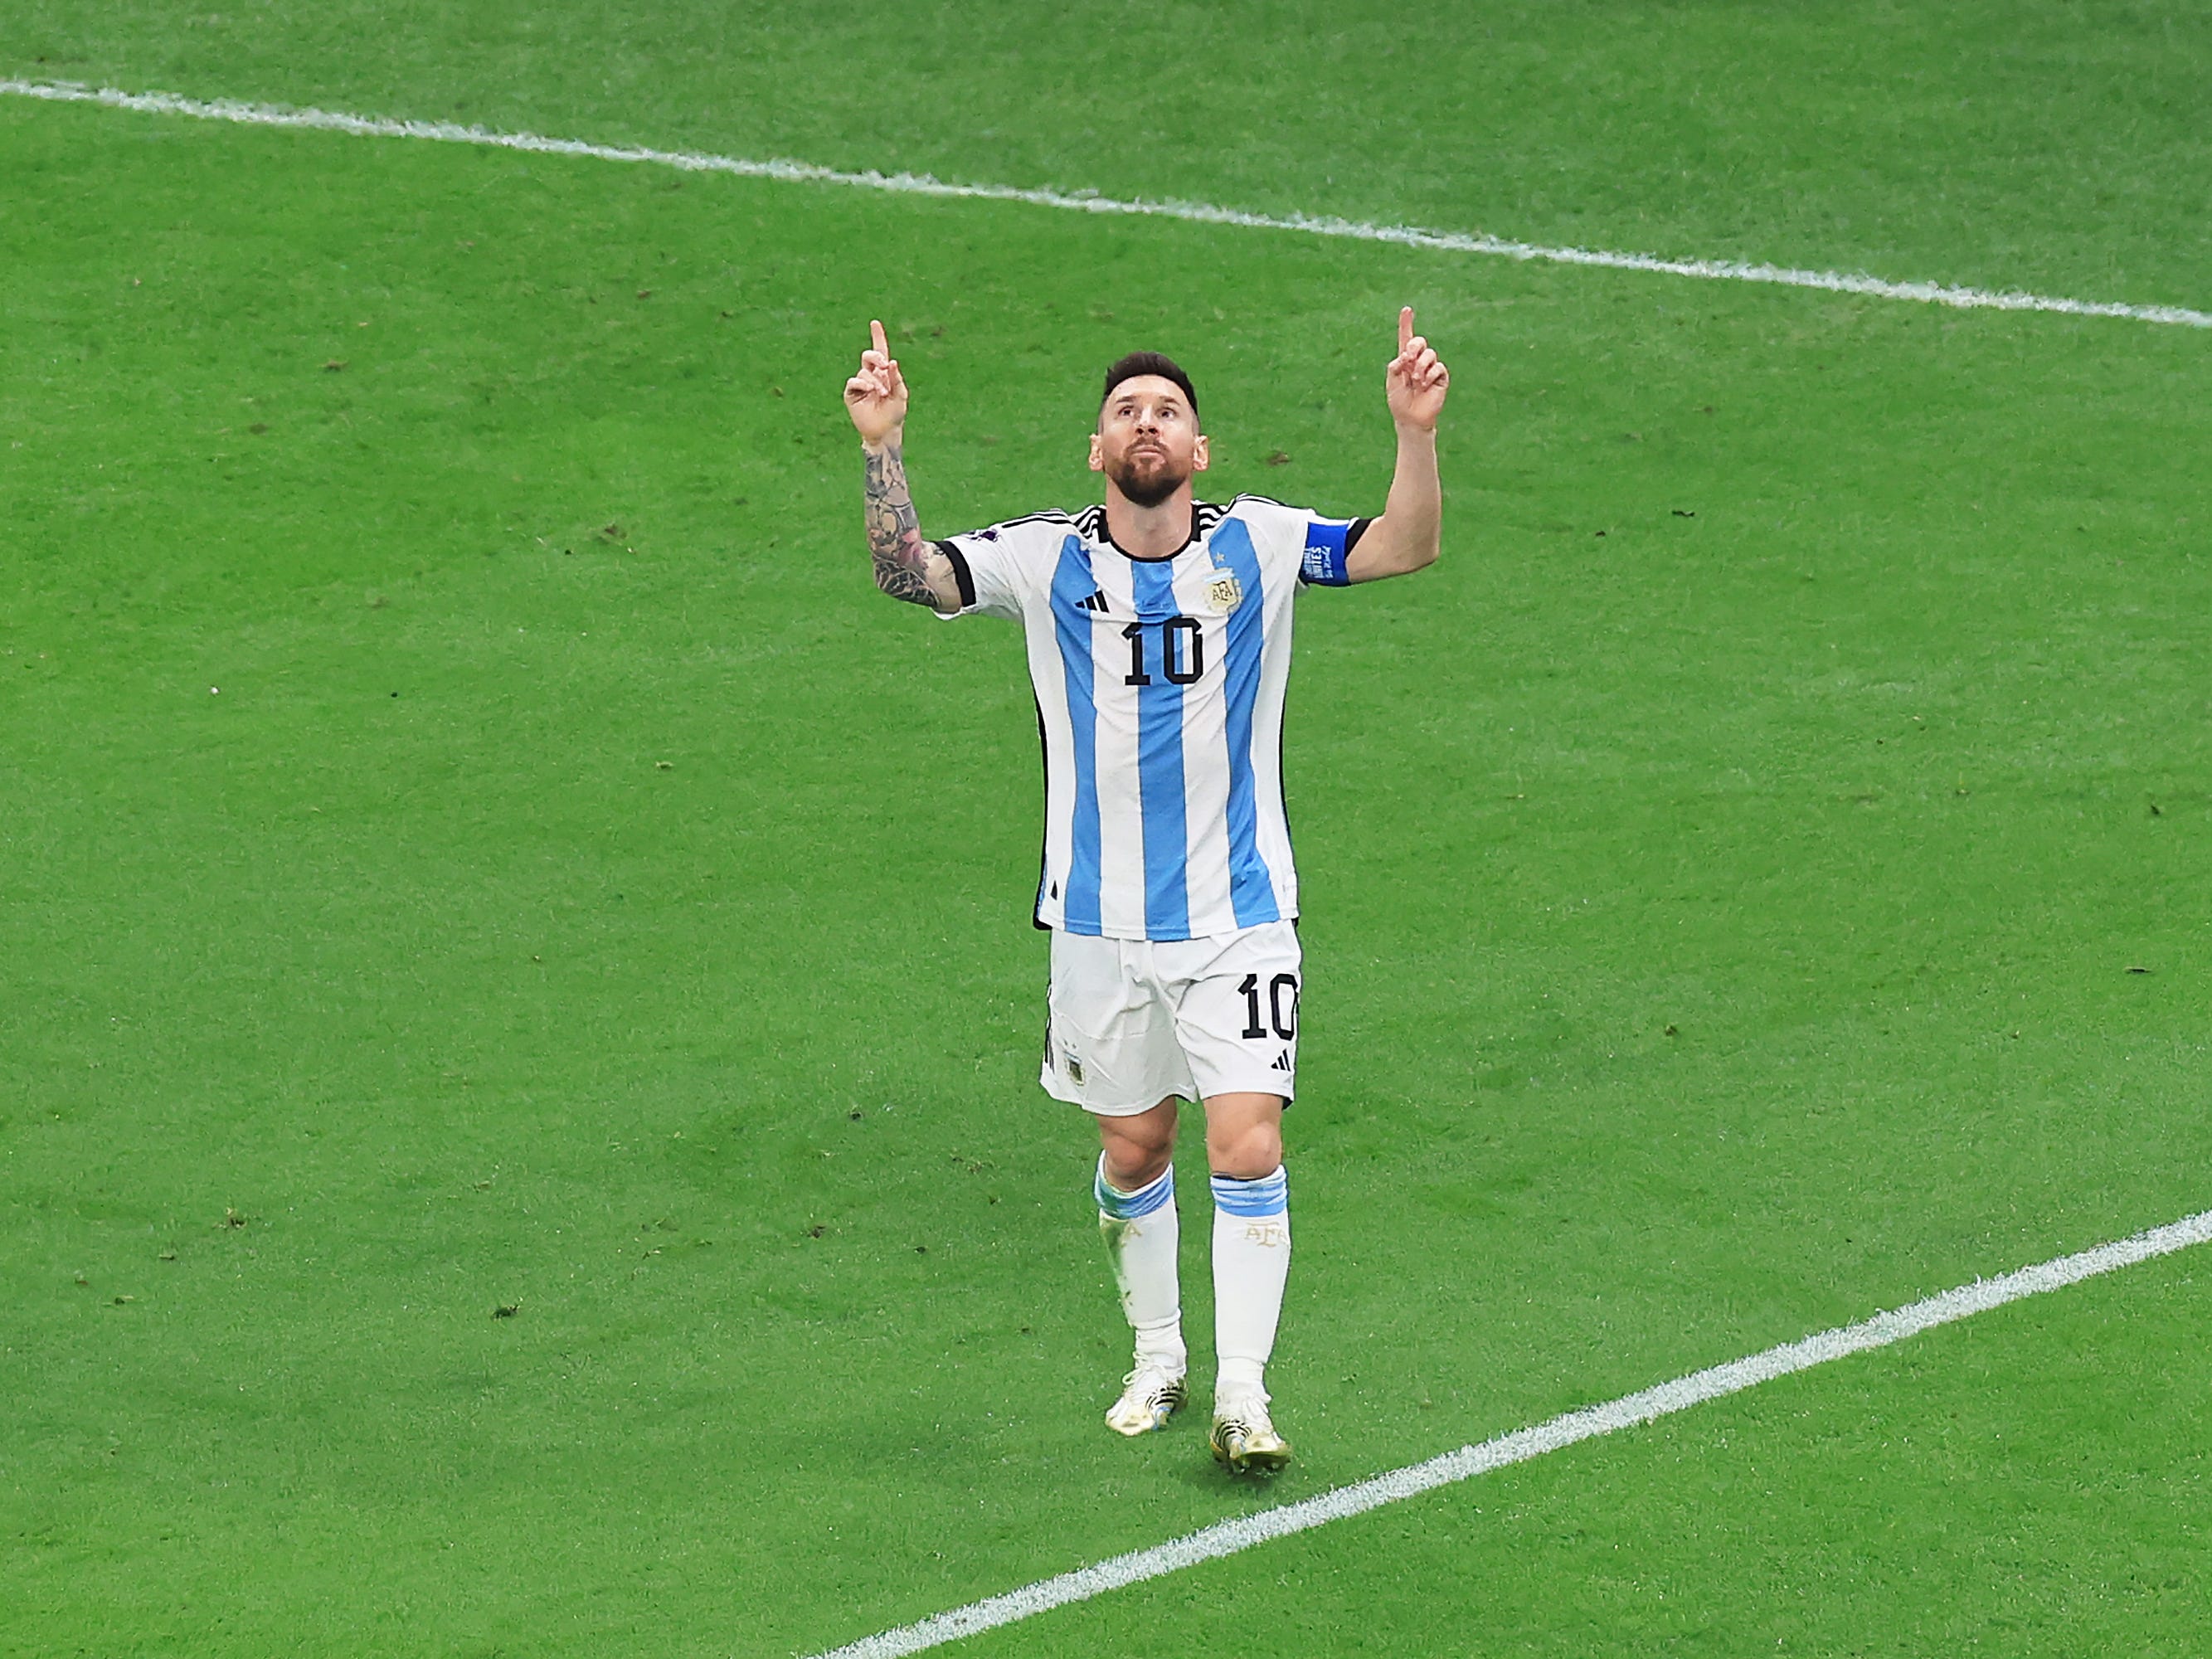 Lionel Messi celebrates after scoring the team's first goal in Sunday's final.